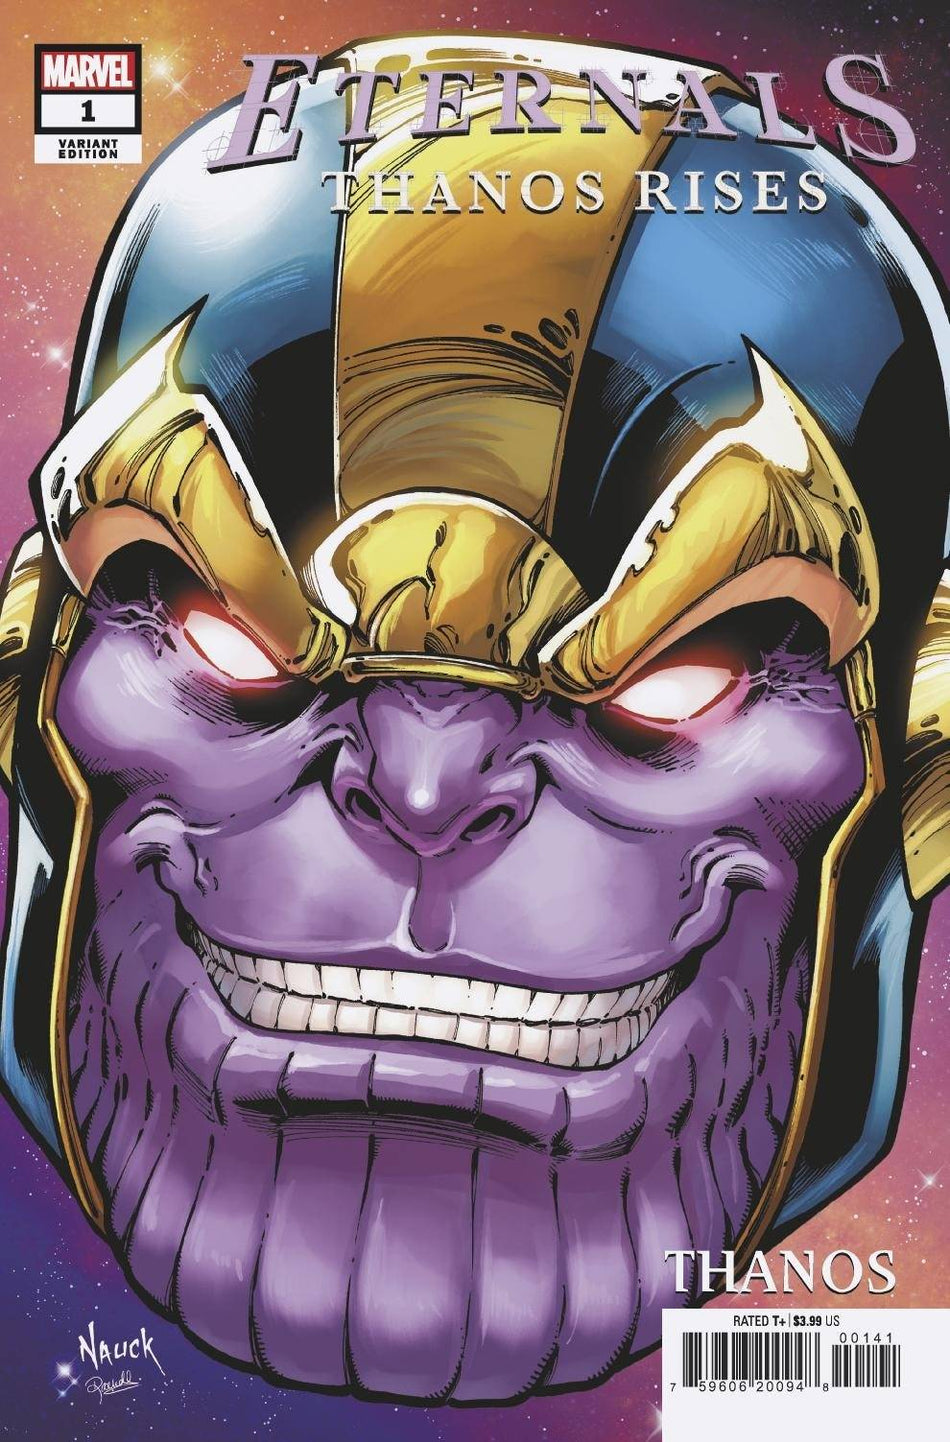 Photo of Eternals Thanos Rises Issue 1 Todd Nauck Headshot Var comic sold by Stronghold Collectibles